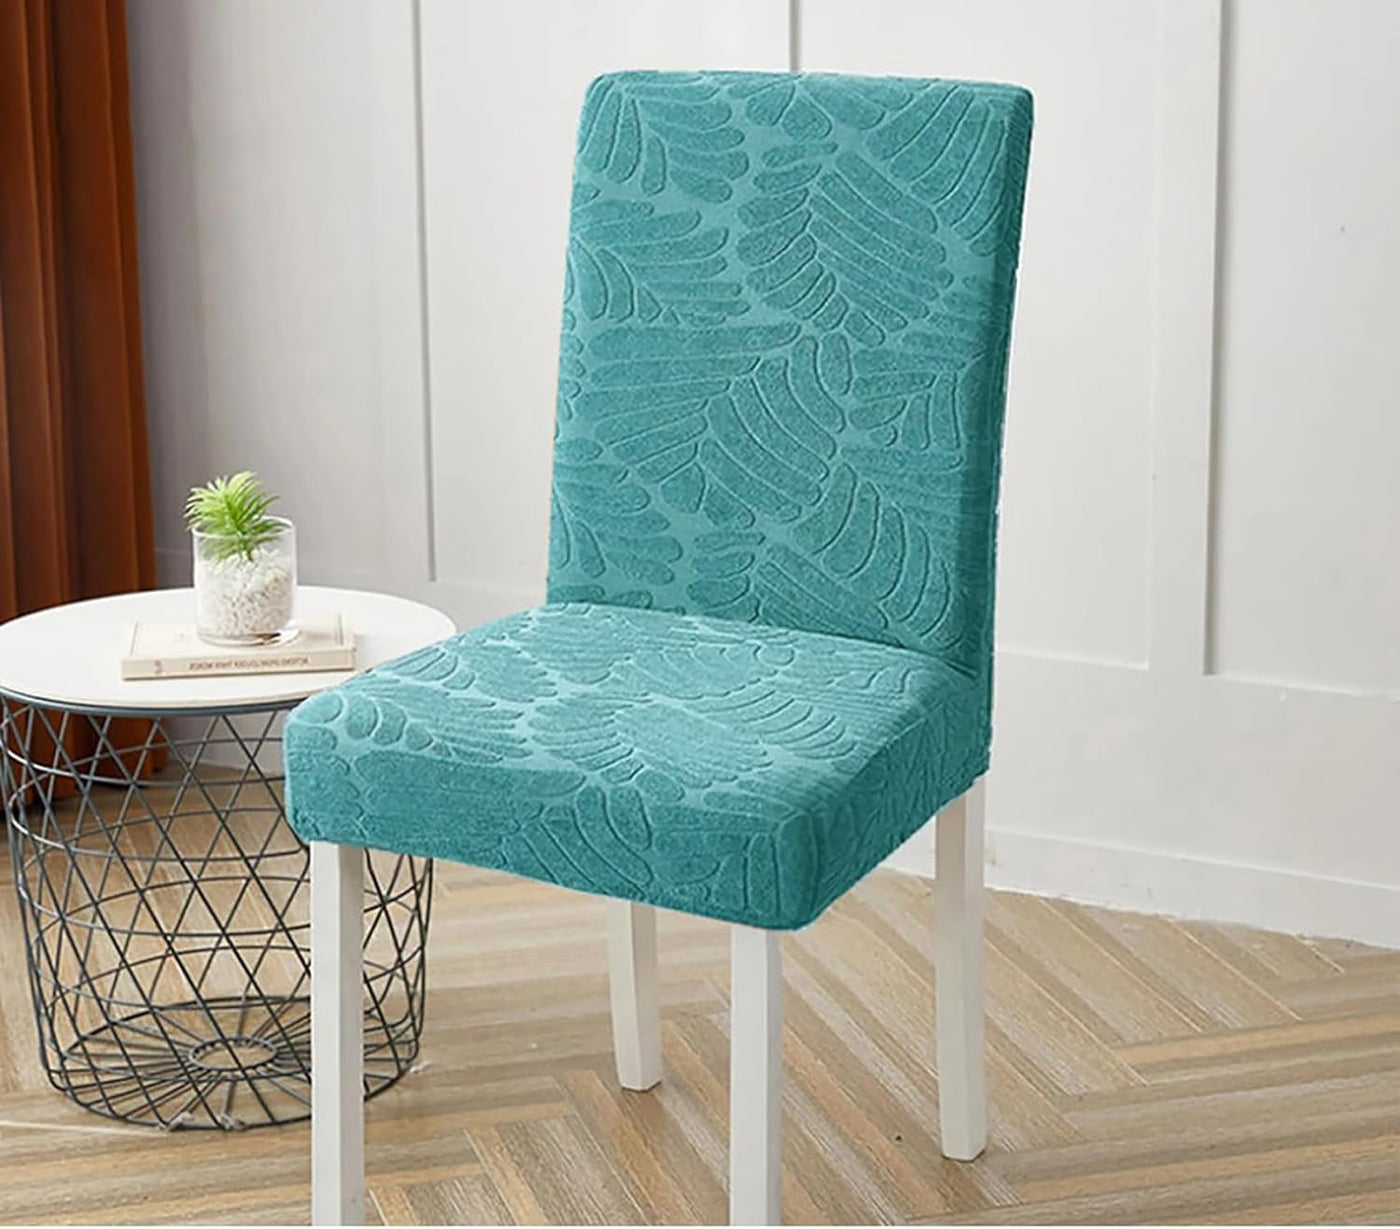 Jacquard Leaf Chair Cover-Teal